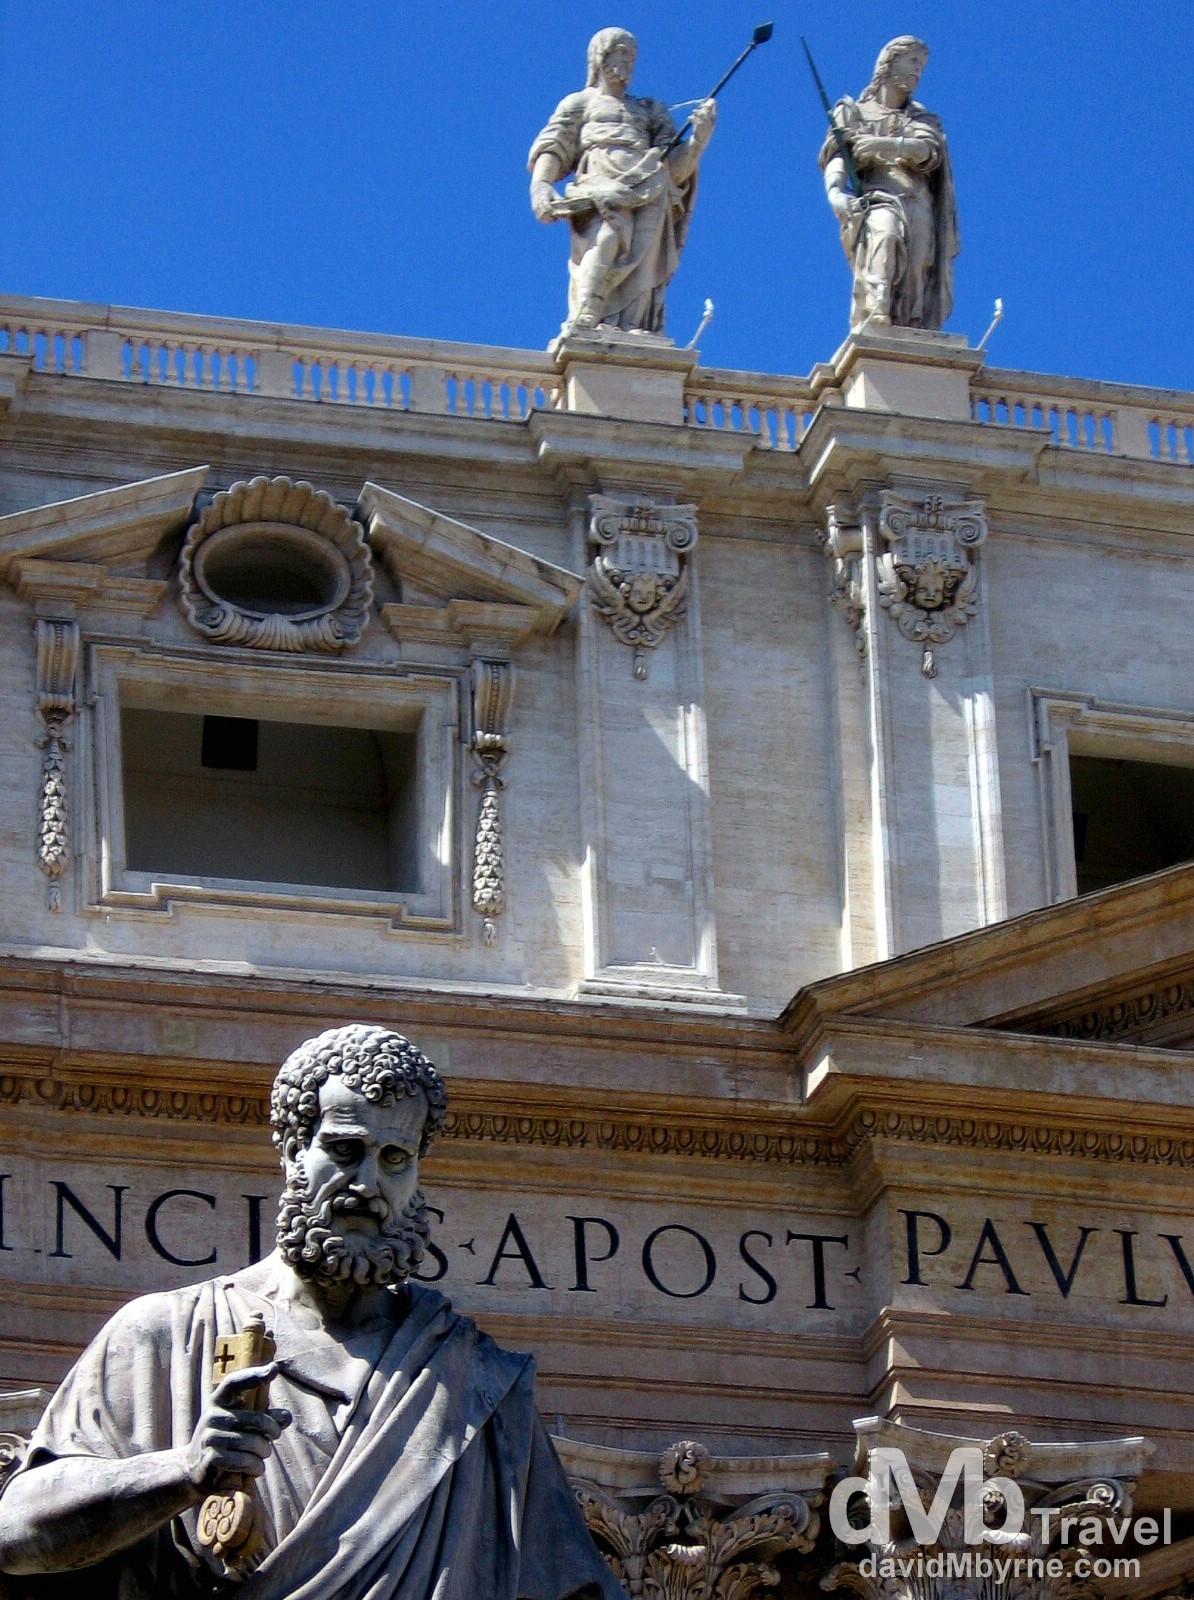 Statues adorning the facade of St. Peter's Basilica, Vatican City. September 1st, 2007.